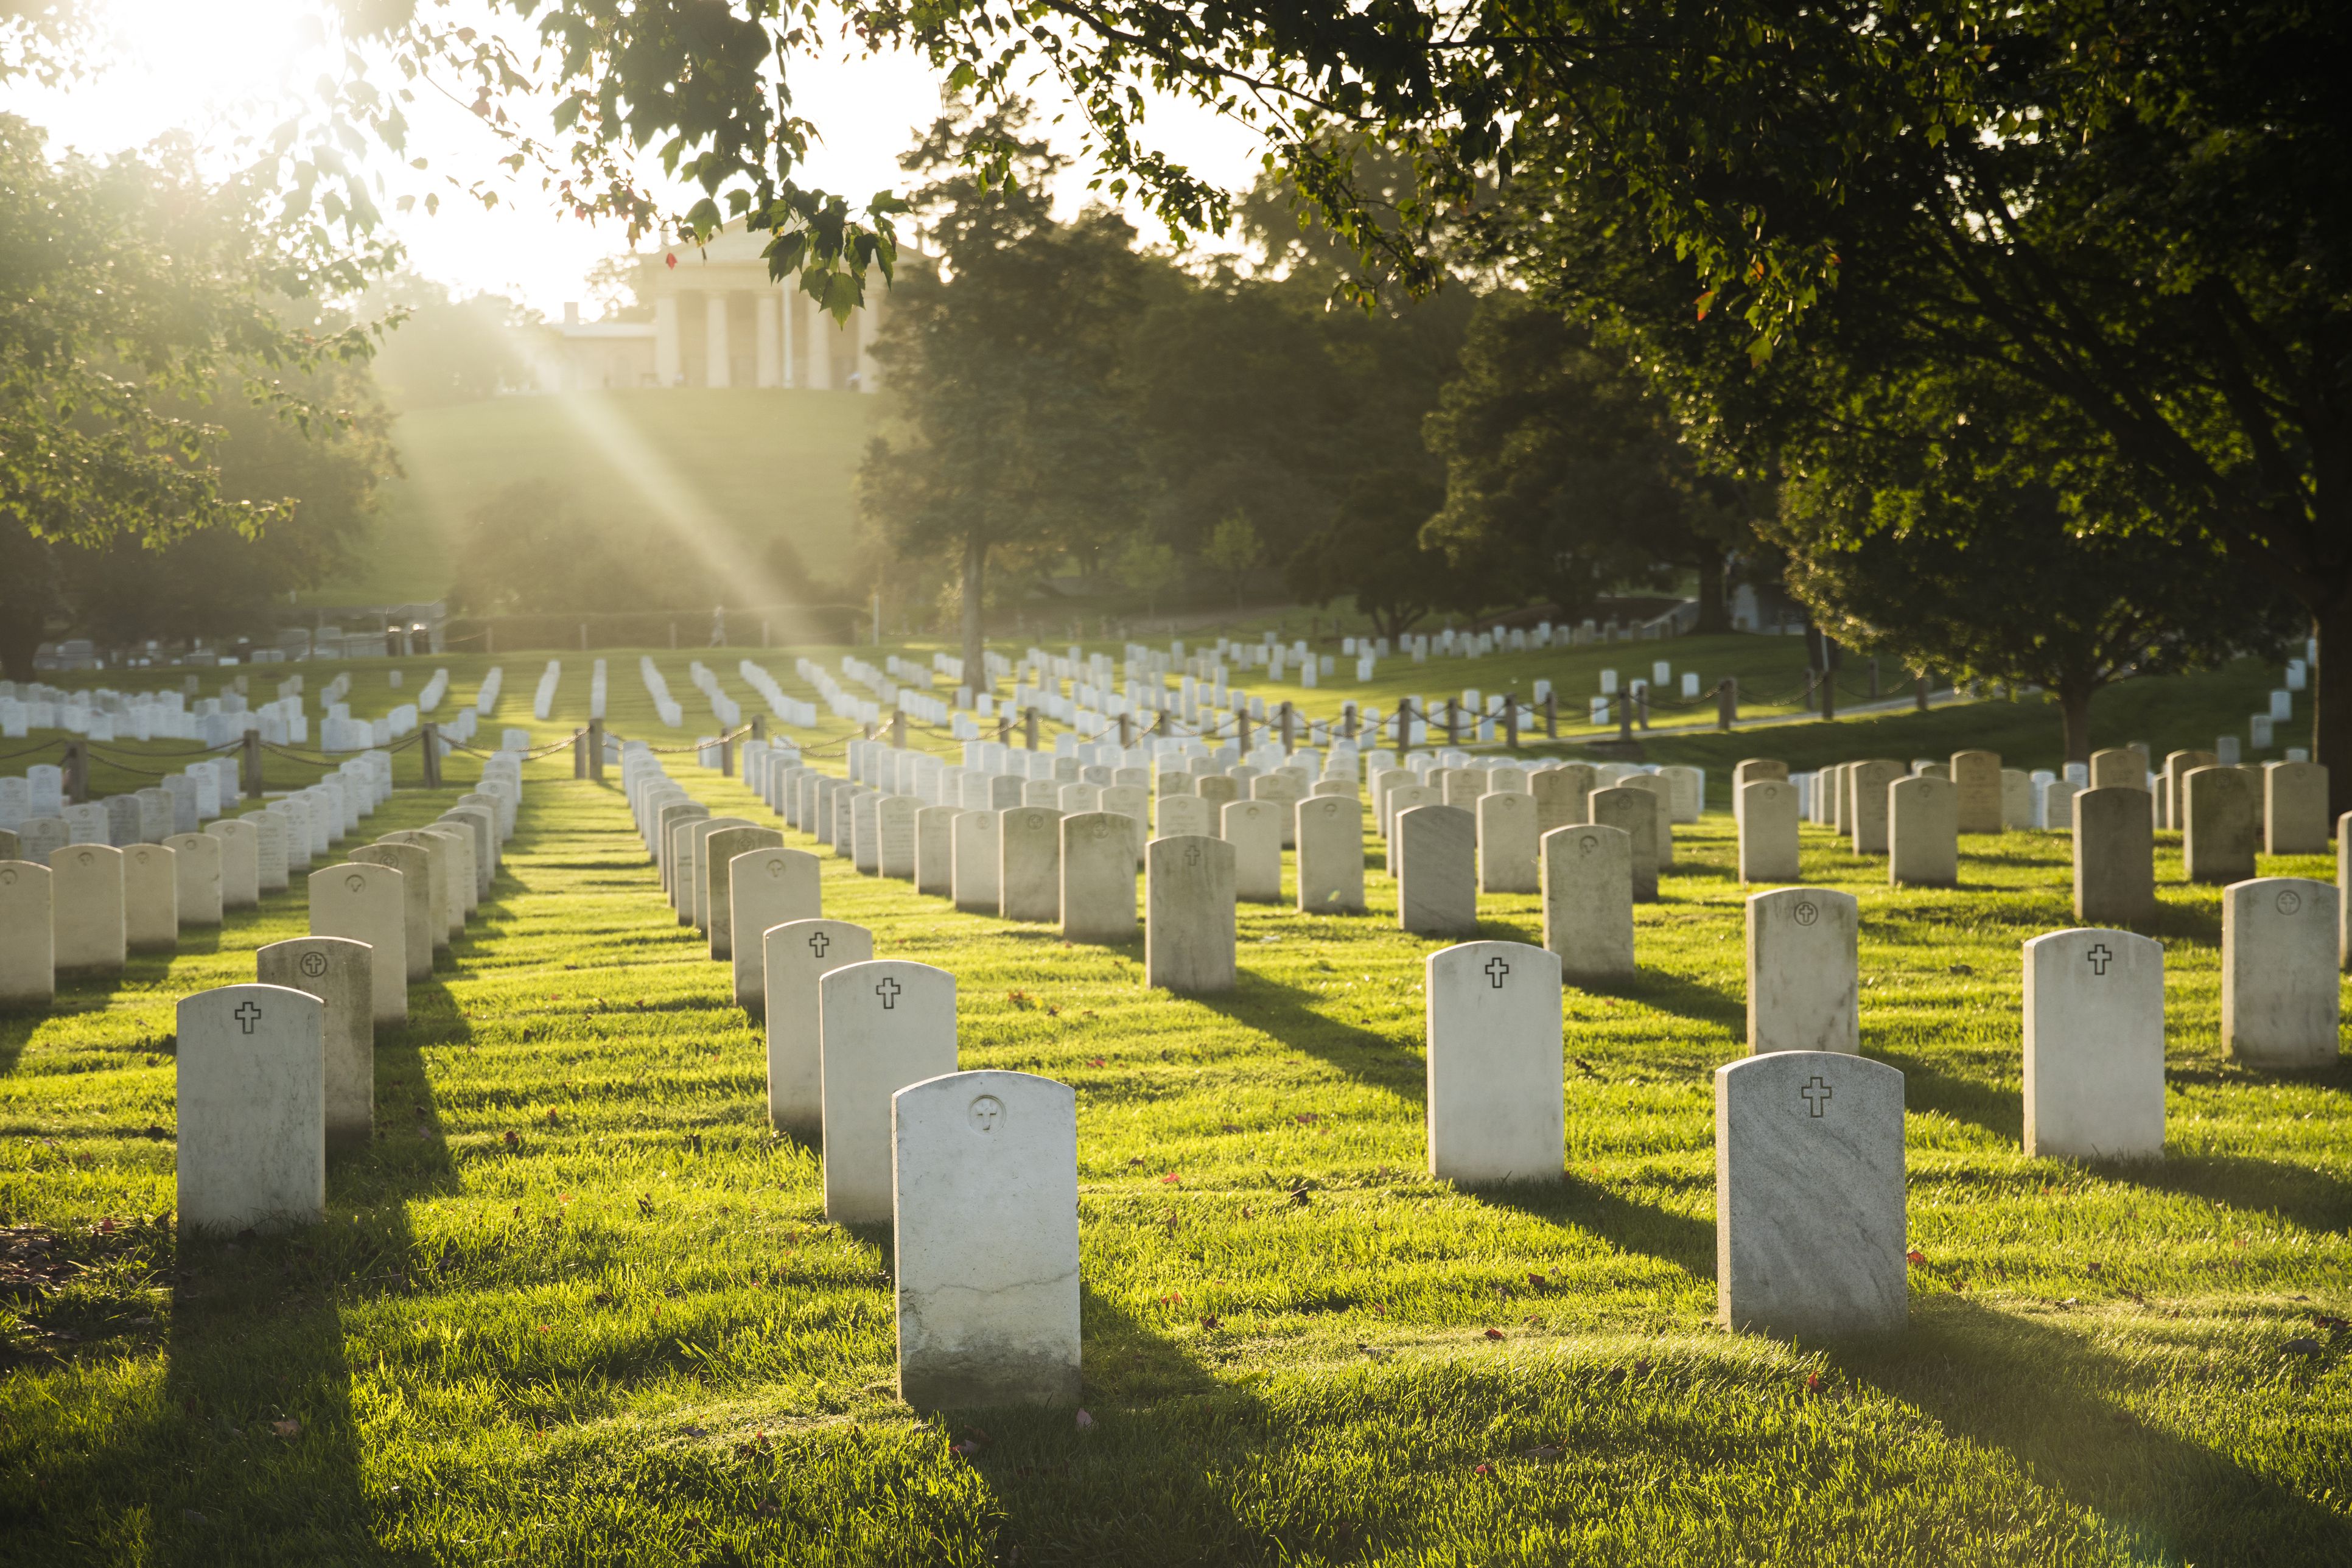 <p>Depending on your mood, there are two free sites to see in northern Virginia — <a href="https://www.arlingtoncemetery.mil/">Arlington National Cemetery</a> and the <a href="https://airandspace.si.edu/udvar-hazy-center">Udvar-Hazy Center</a>, part of the Smithsonian National Air and Space Museum. Arlington National Cemetery is the resting place of hundreds of thousands American military members, with remains of soldiers from every conflict since the Revolutionary War. At Udvar-Hazy Center, you can see a wide range of aircrafts, including a Concorde, SR-71 Blackbird, and the space shuttle Discovery.</p>